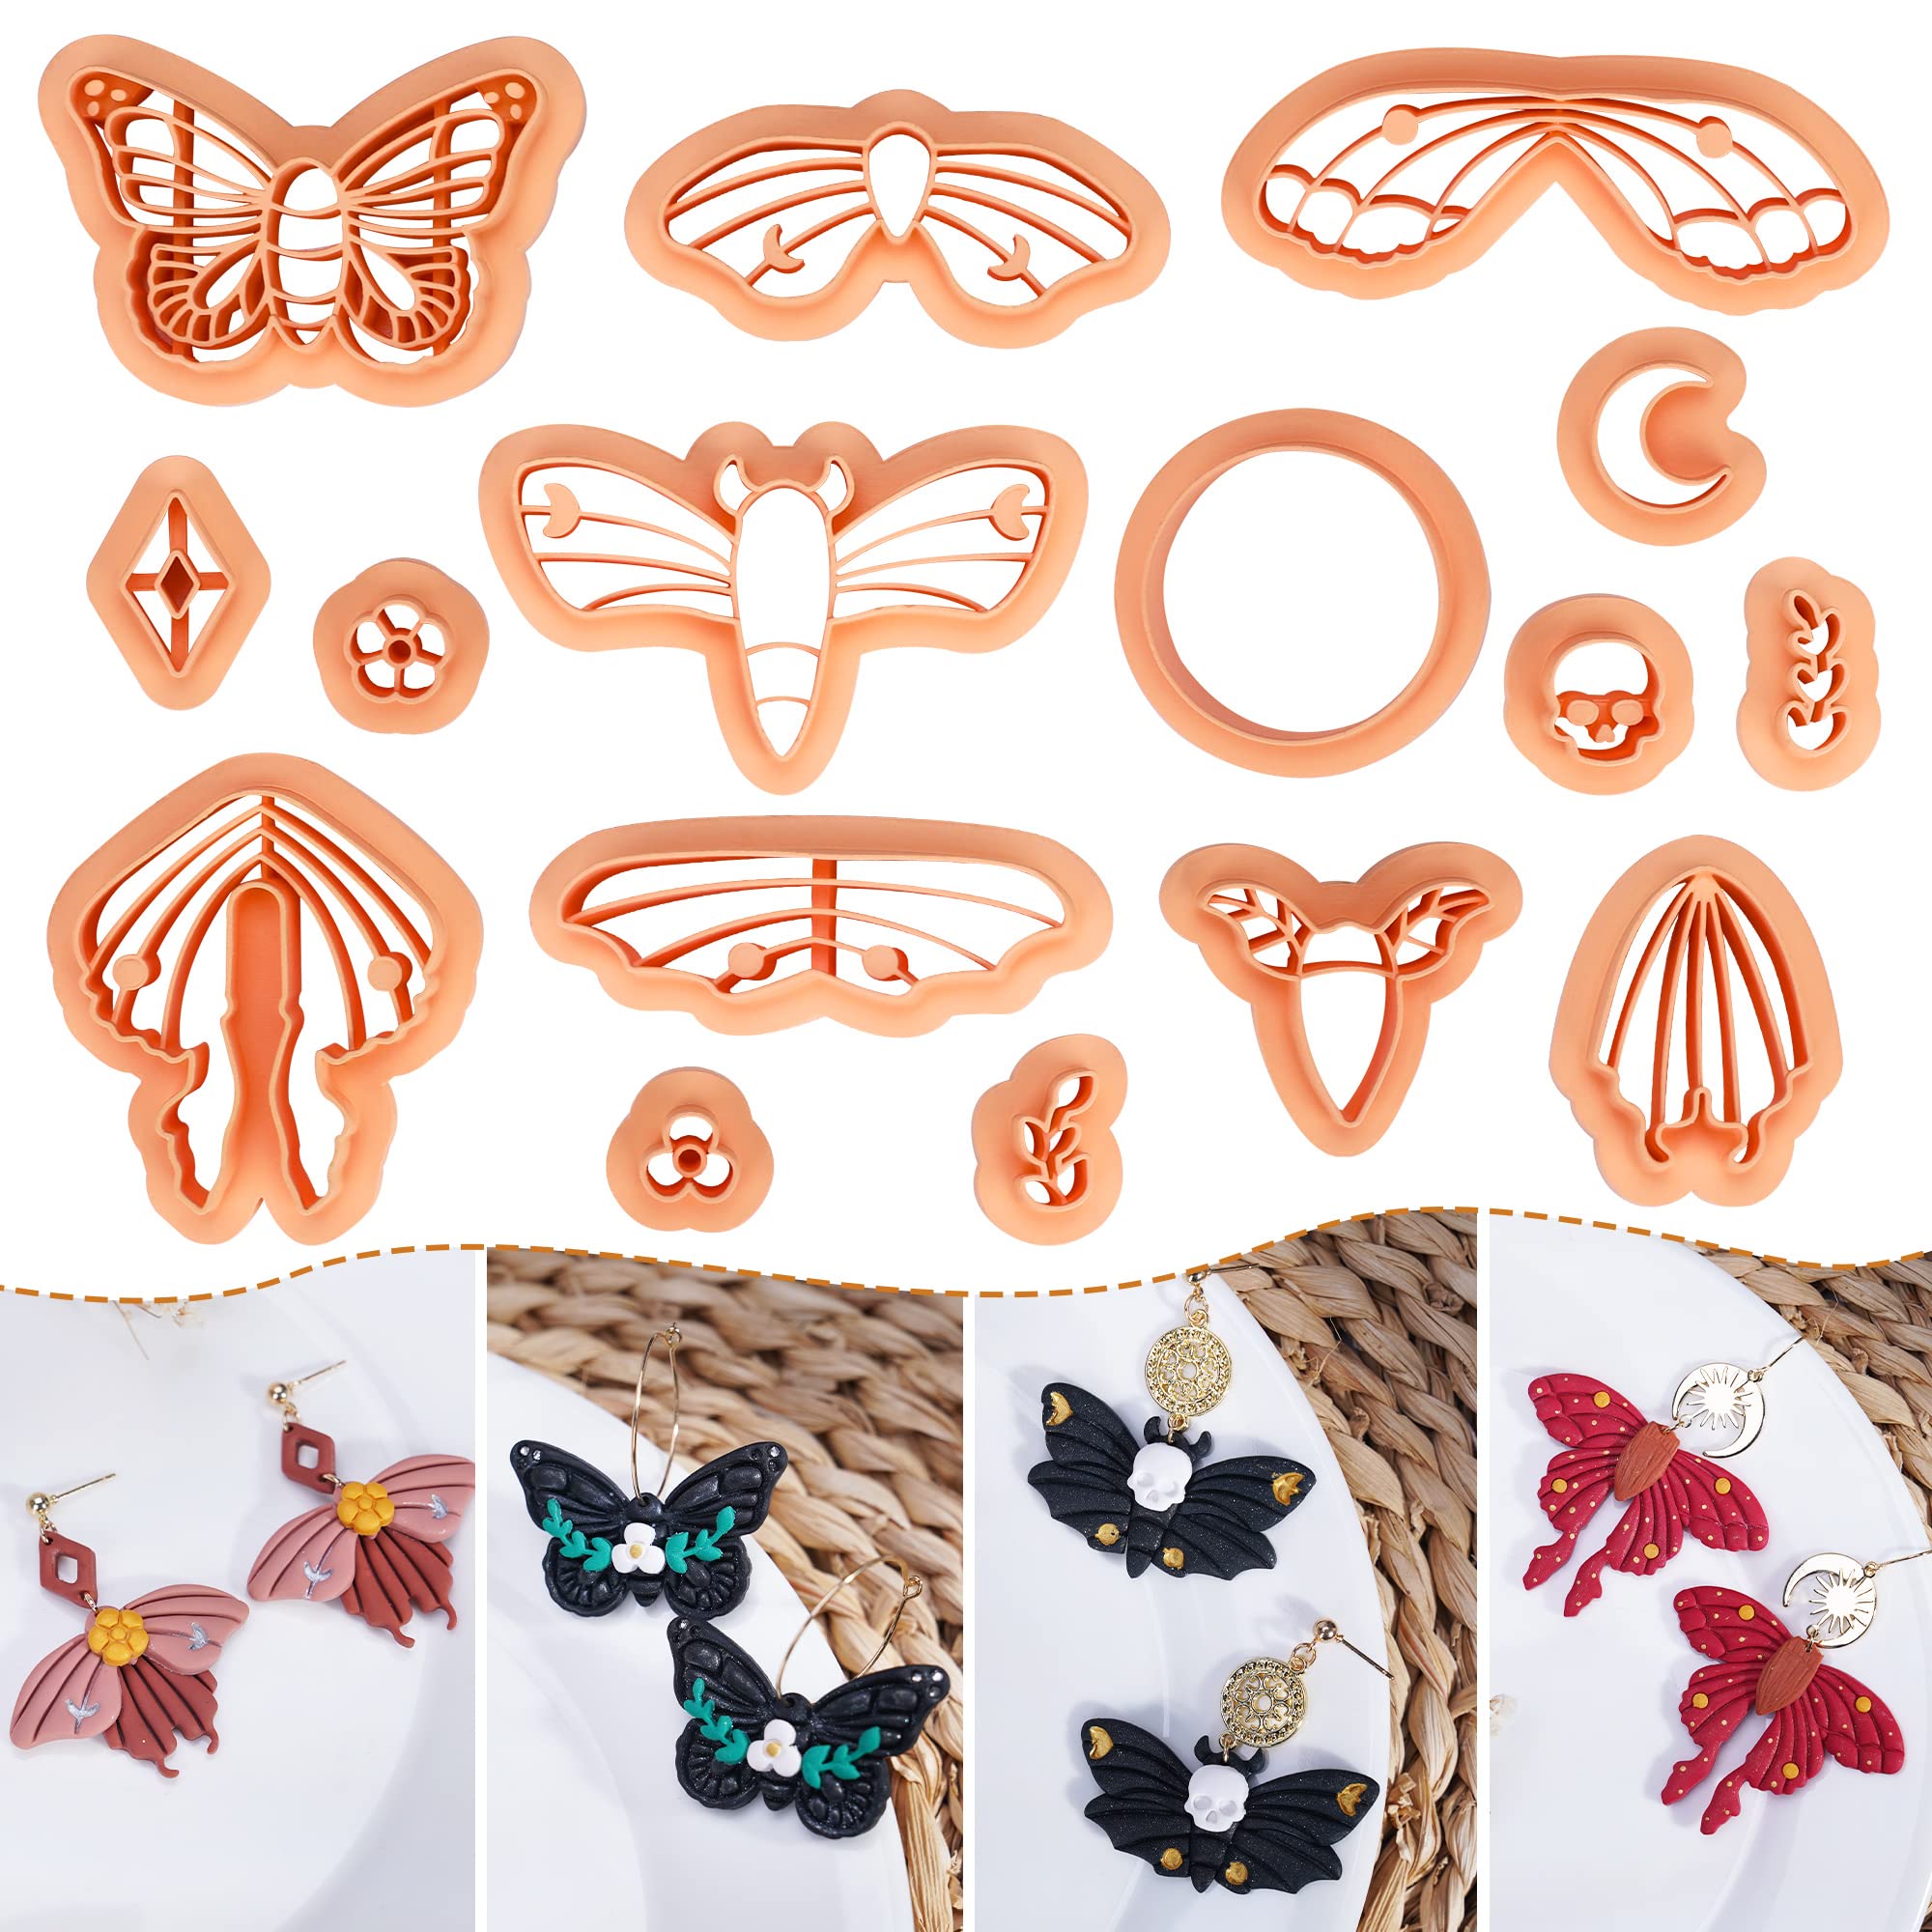 Puocaon Luna Moth Polymer Clay Cutters - 16 Shapes Clay Cutters for Earrings  Moth Shapes Clay Cutters for Polymer Clay Jewelry Making Mystical Drop  Dangle Earrings Clay Earring Cutters